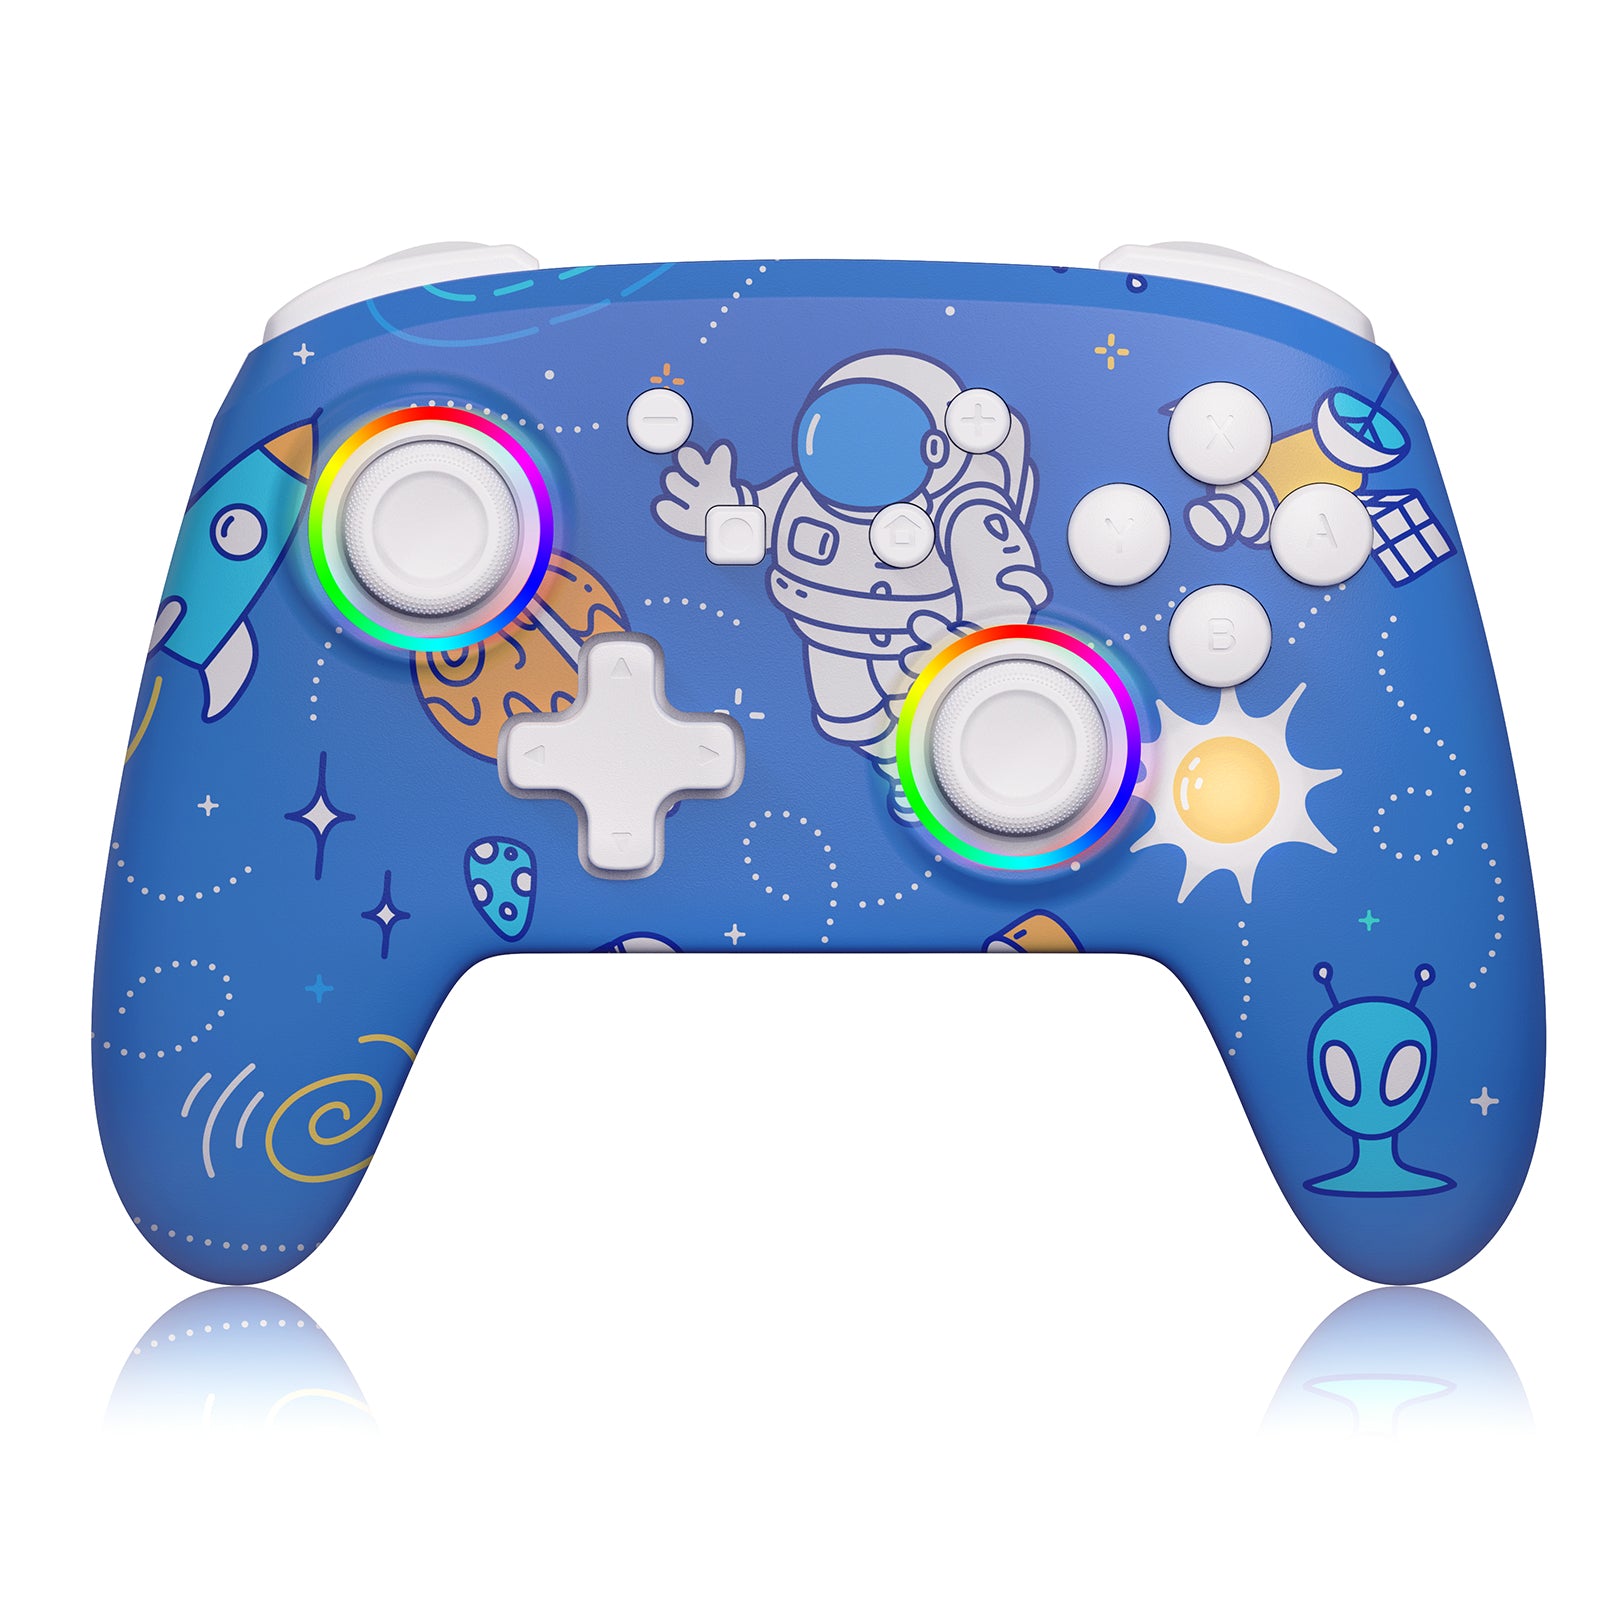 The image showcases a blue astronaut skin on the Bluetooth controller.